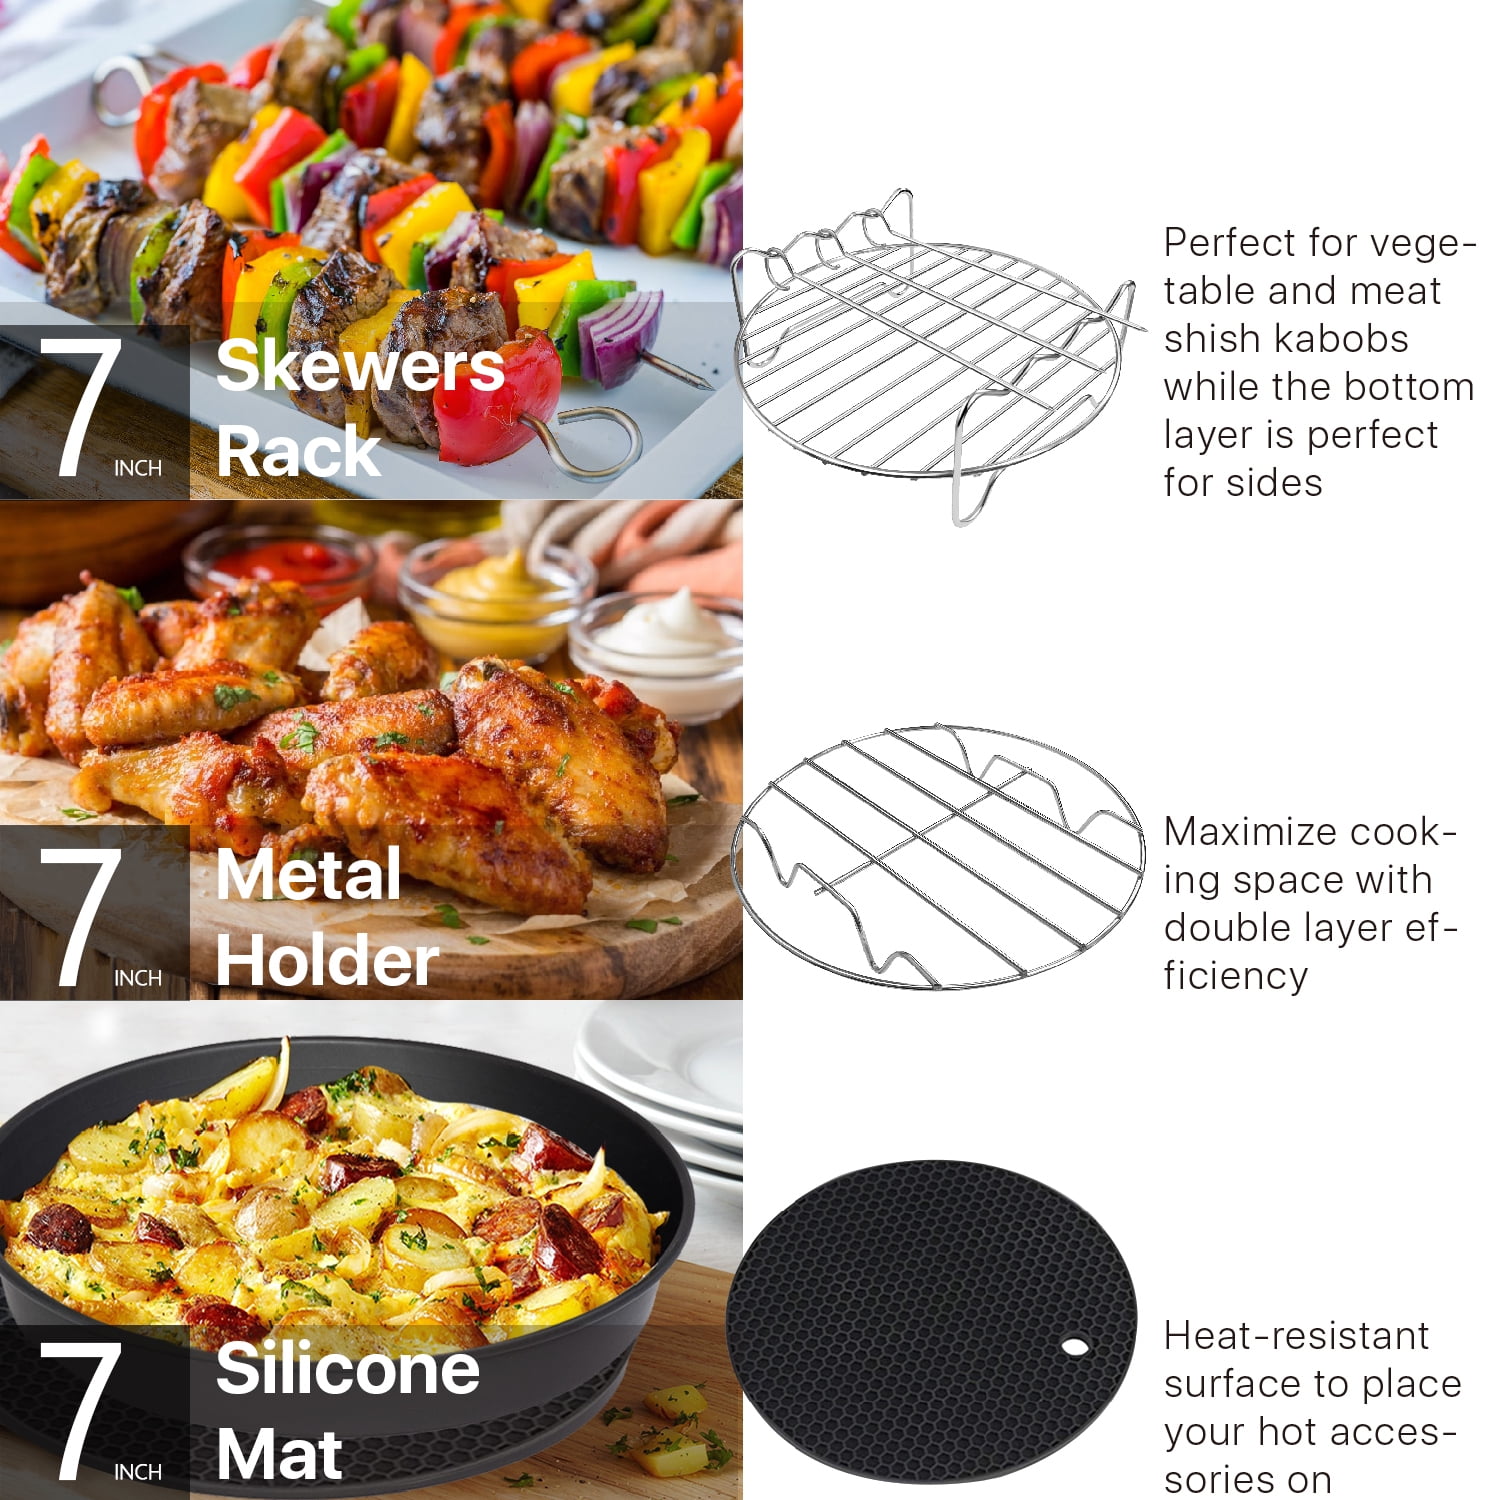 12 Pcs Air Fryer Accessories with Rack, Grill Pan, Air Fryer Cheat Sheet  for Chefman, Cosori, Dash, Nuwave®, Emeril Lagasse, Secura, Comfee, Square